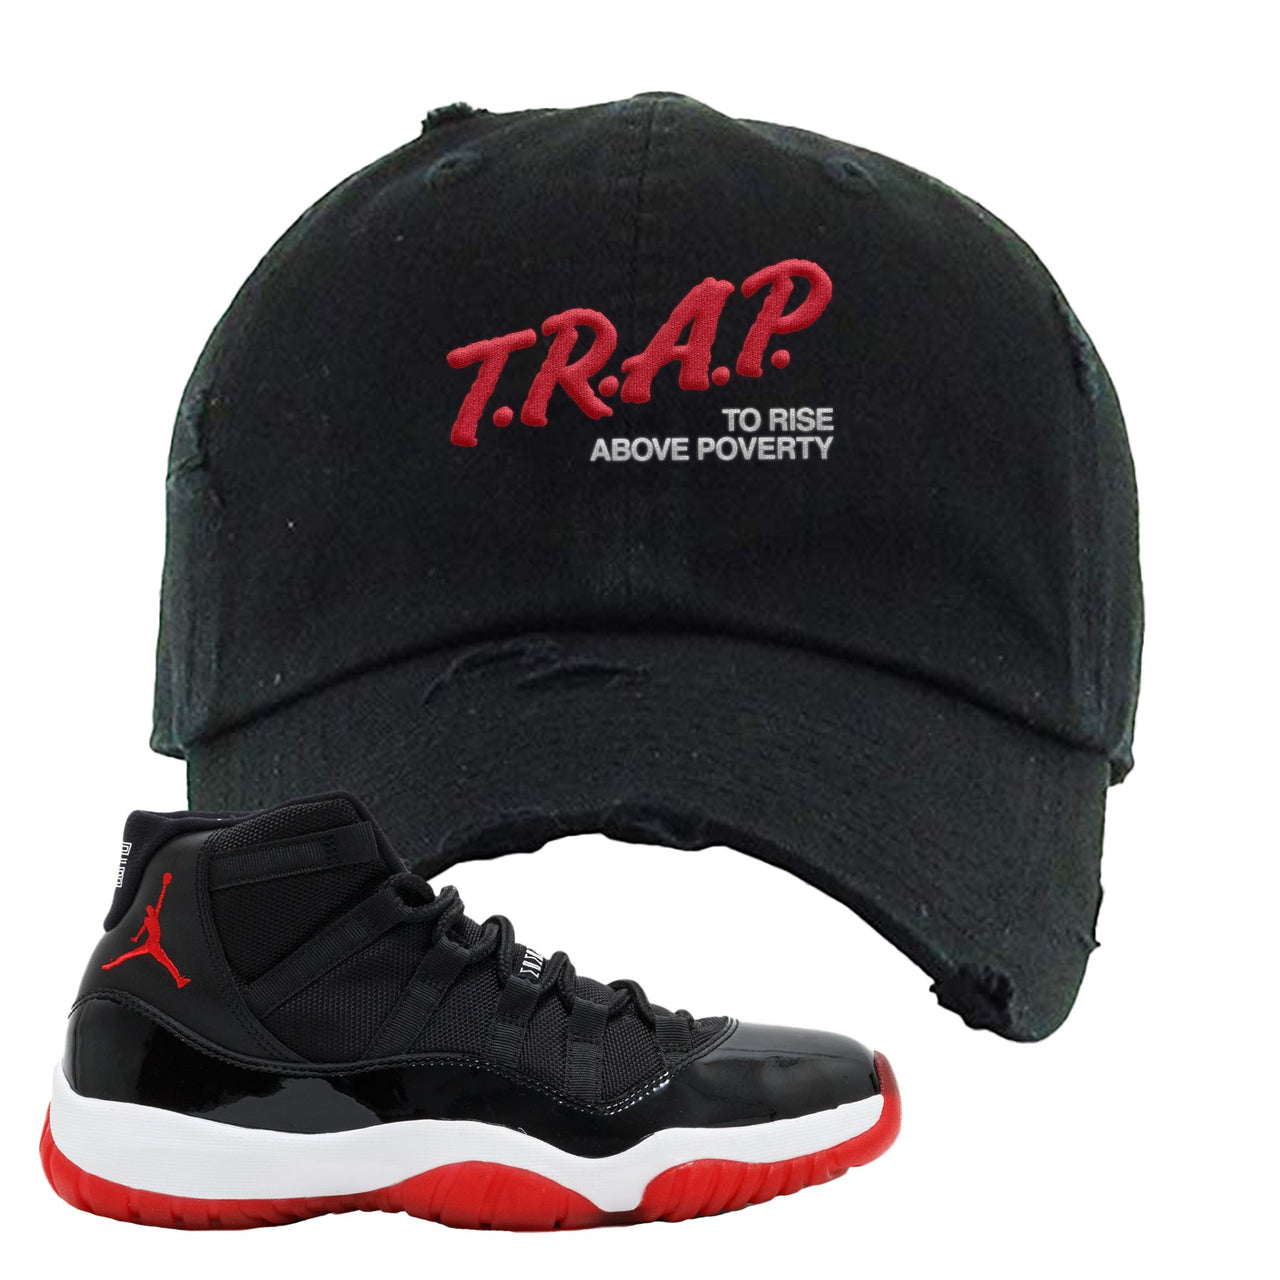 Jordan 11 Bred Trap To Rise Above Poverty Black Sneaker Hook Up Dad Hat